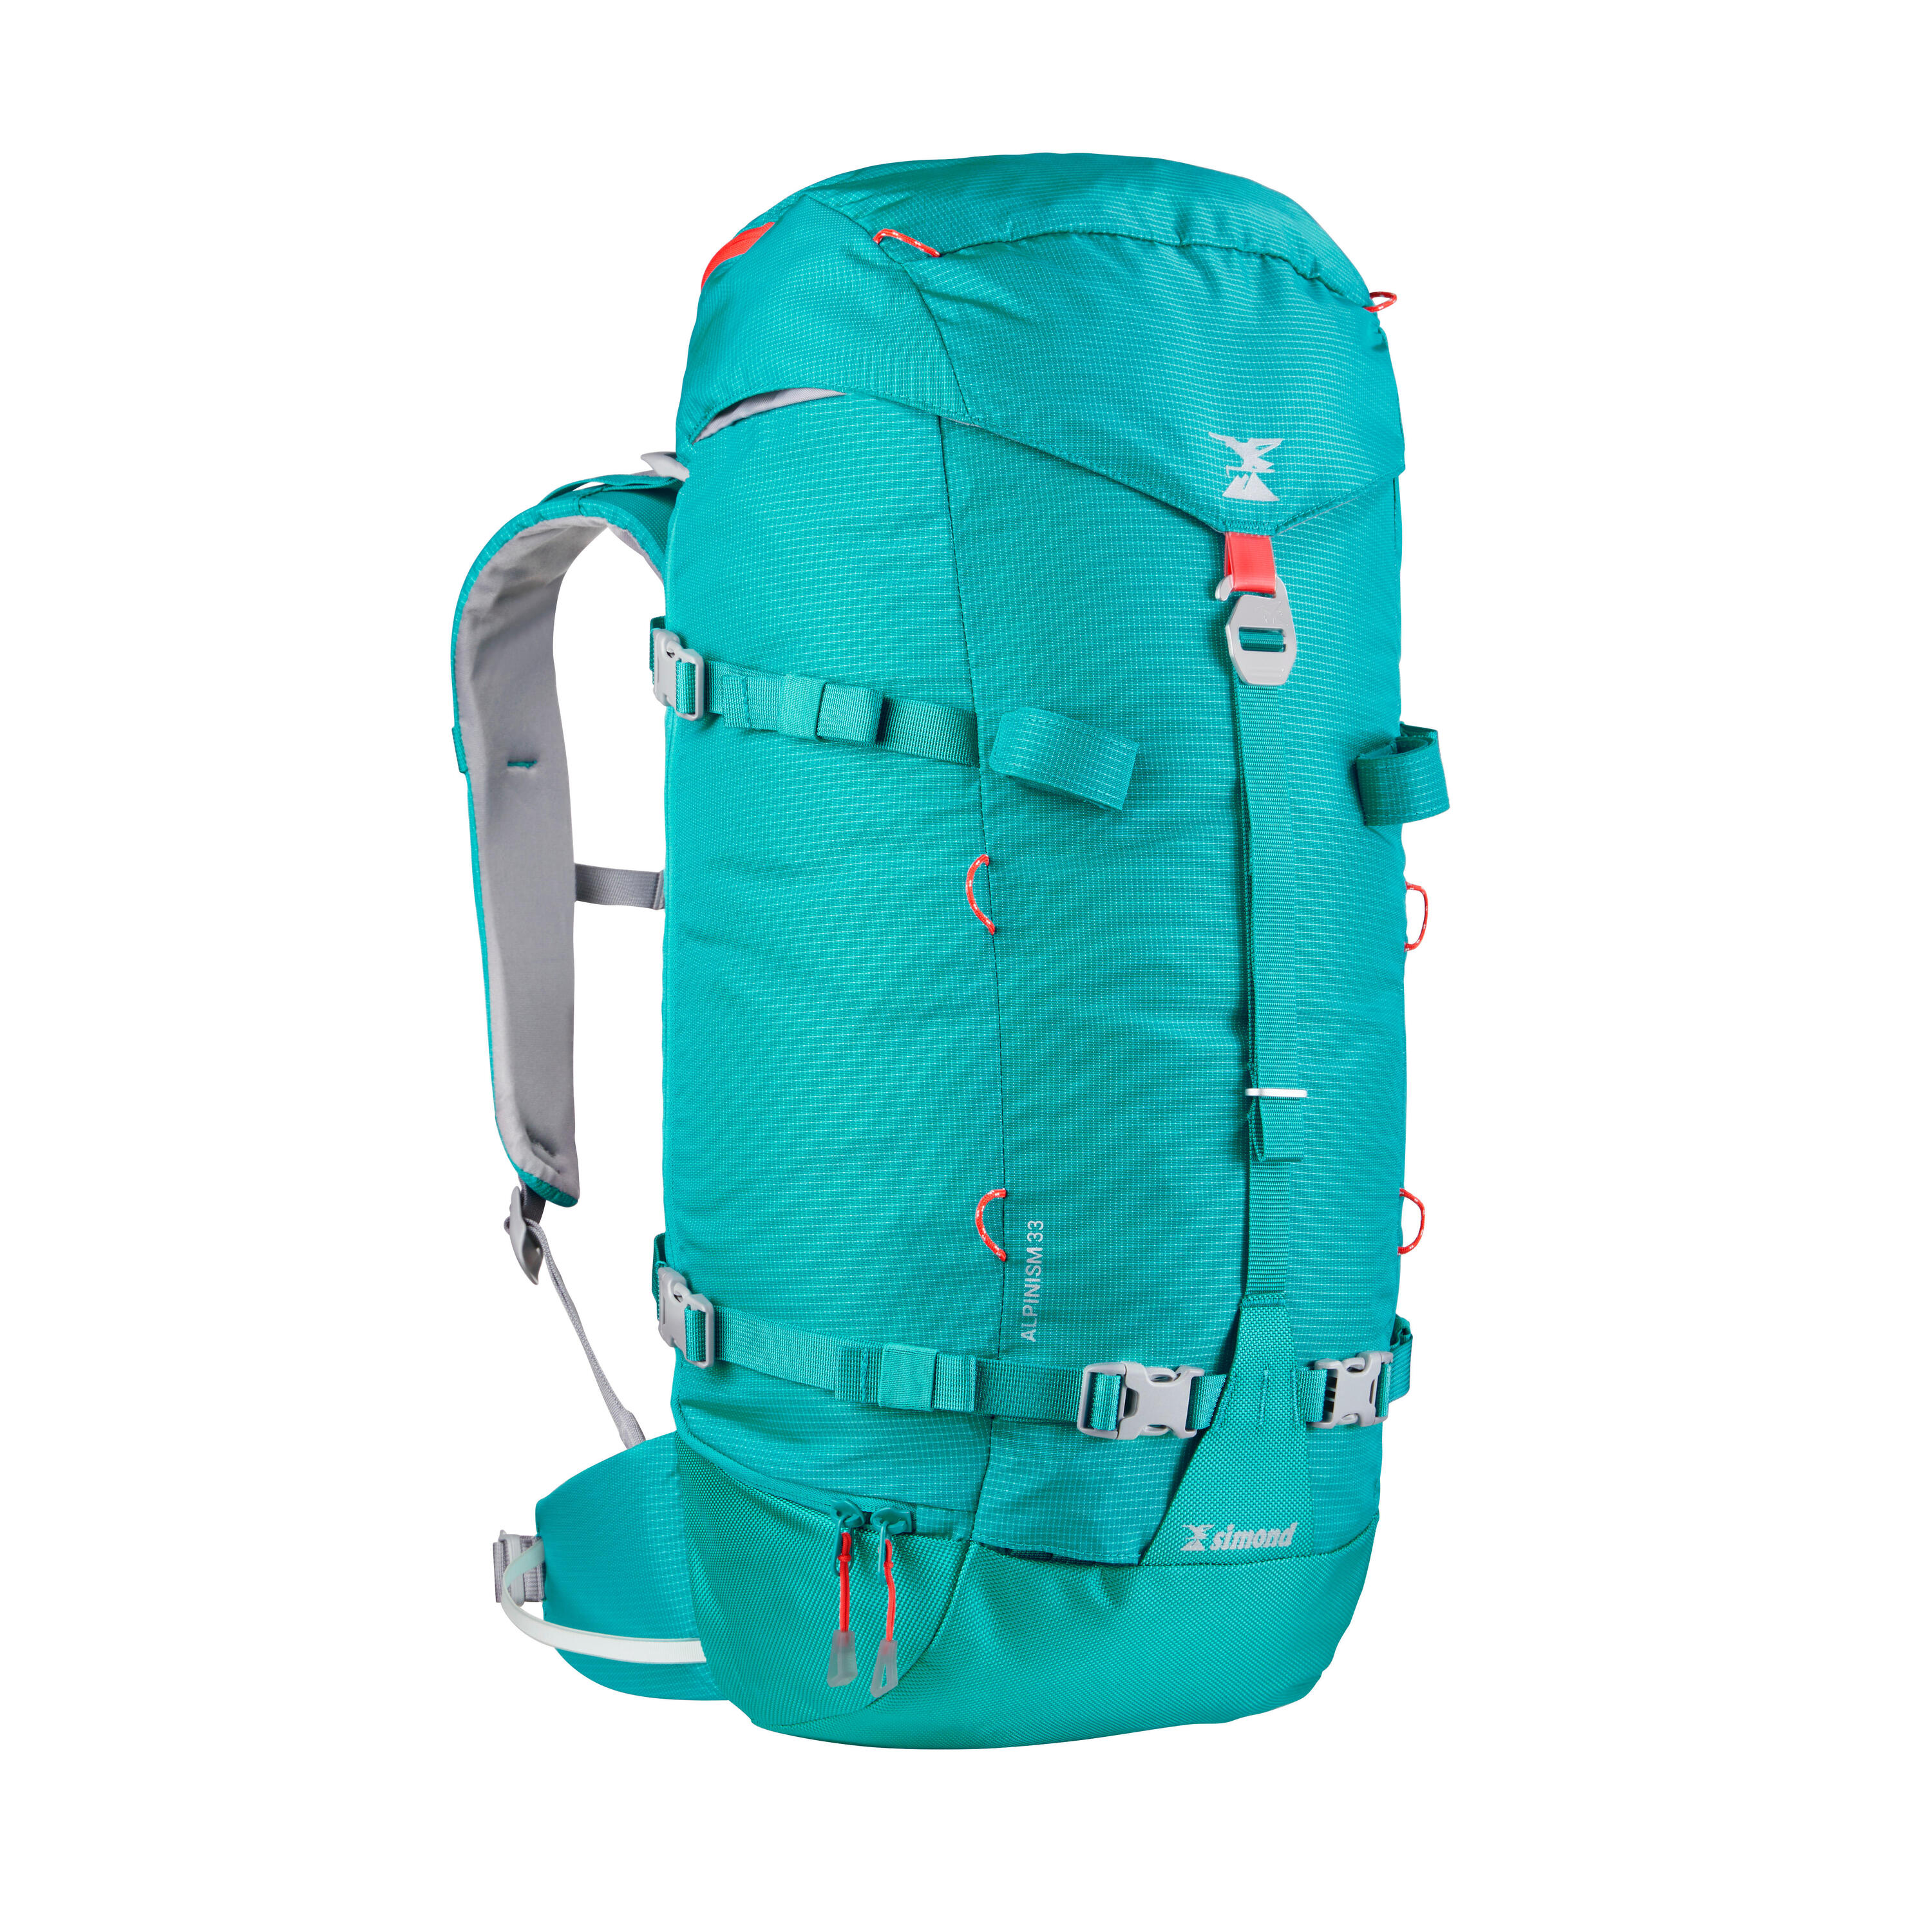 SIMOND Mountaineering Backpack 33 Litres - Alpinism 33 Turquoise